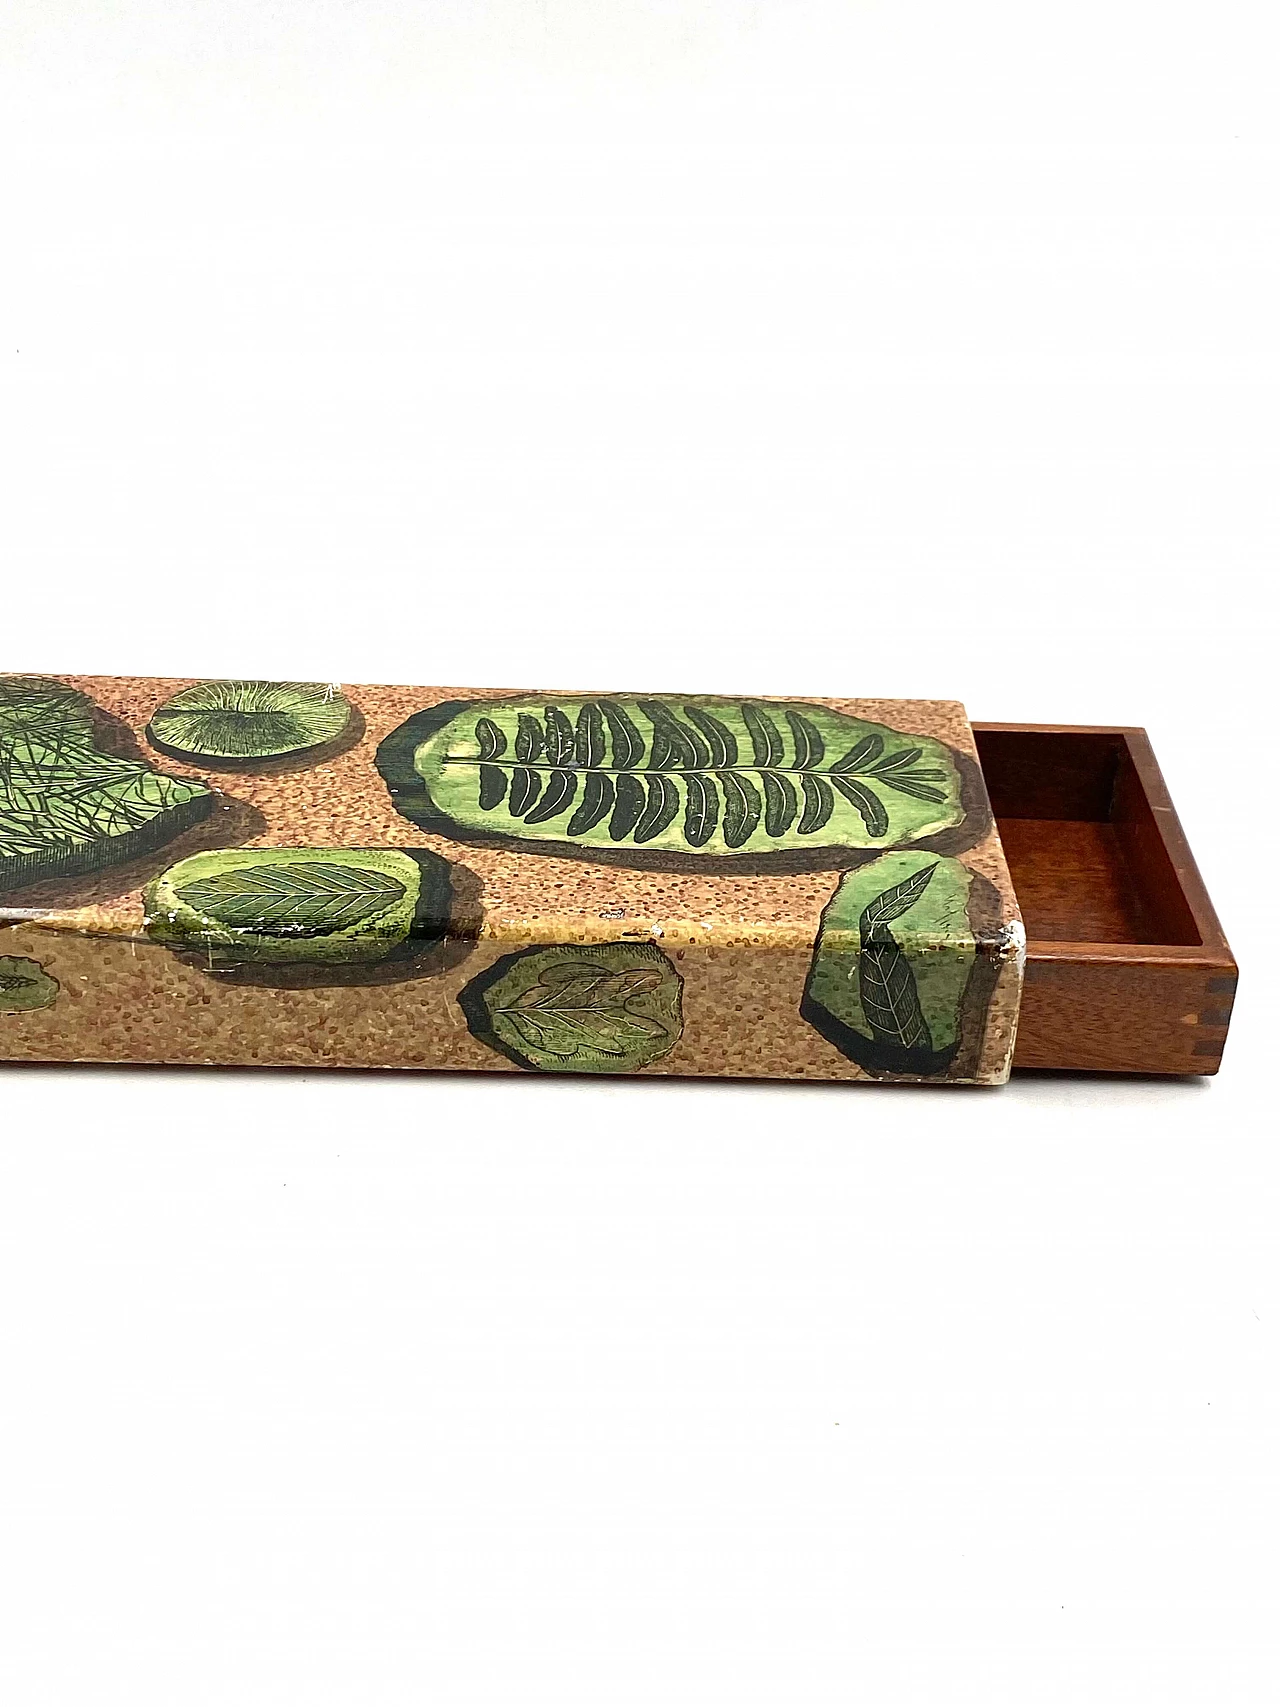 Cigar box with plant motif by Piero Fornasetti, 1950s 15